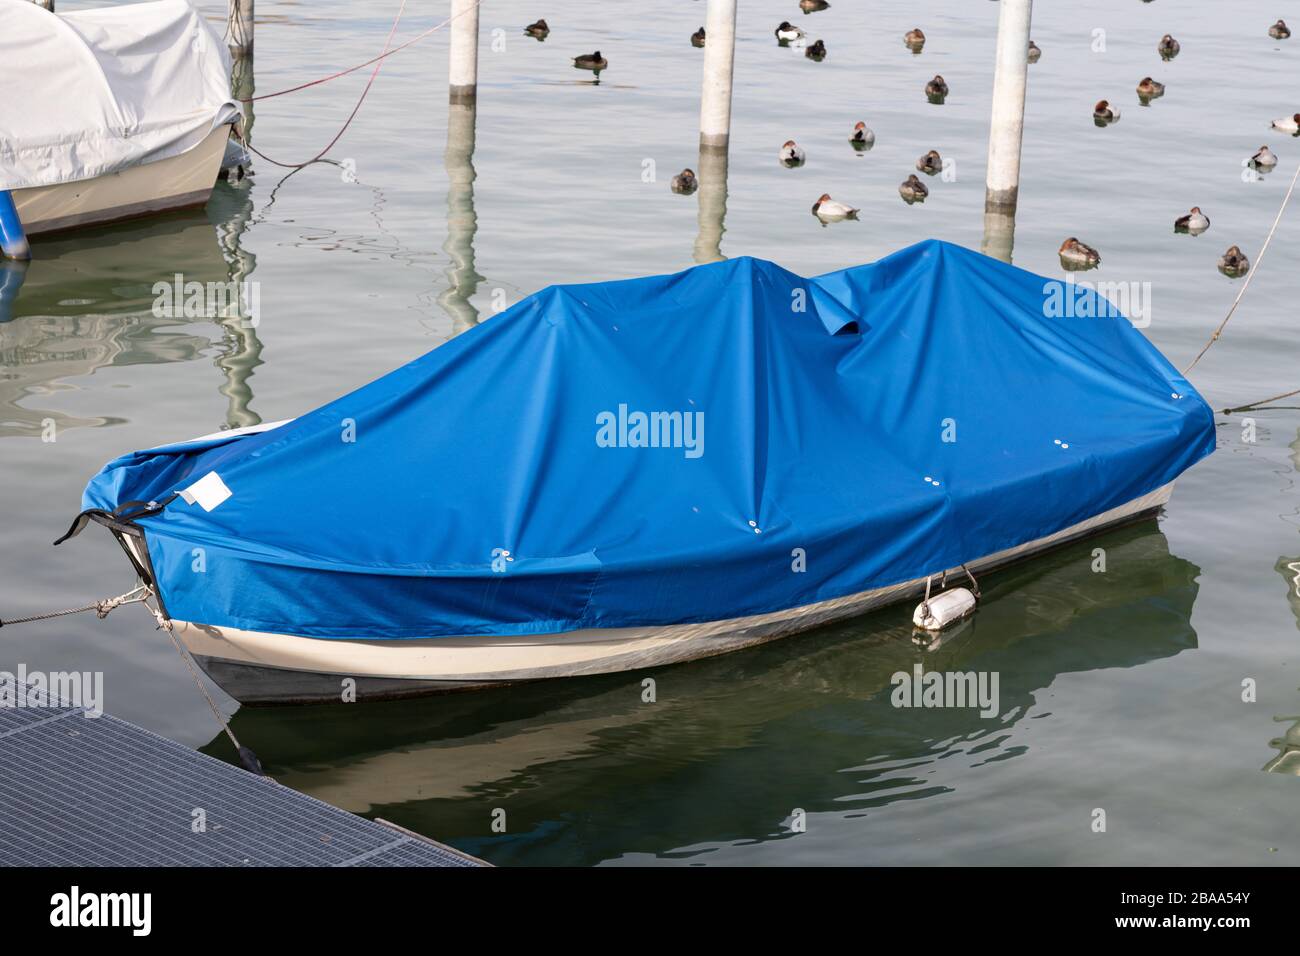 white fishing boat with blue boat cover, cloudy sky and brown